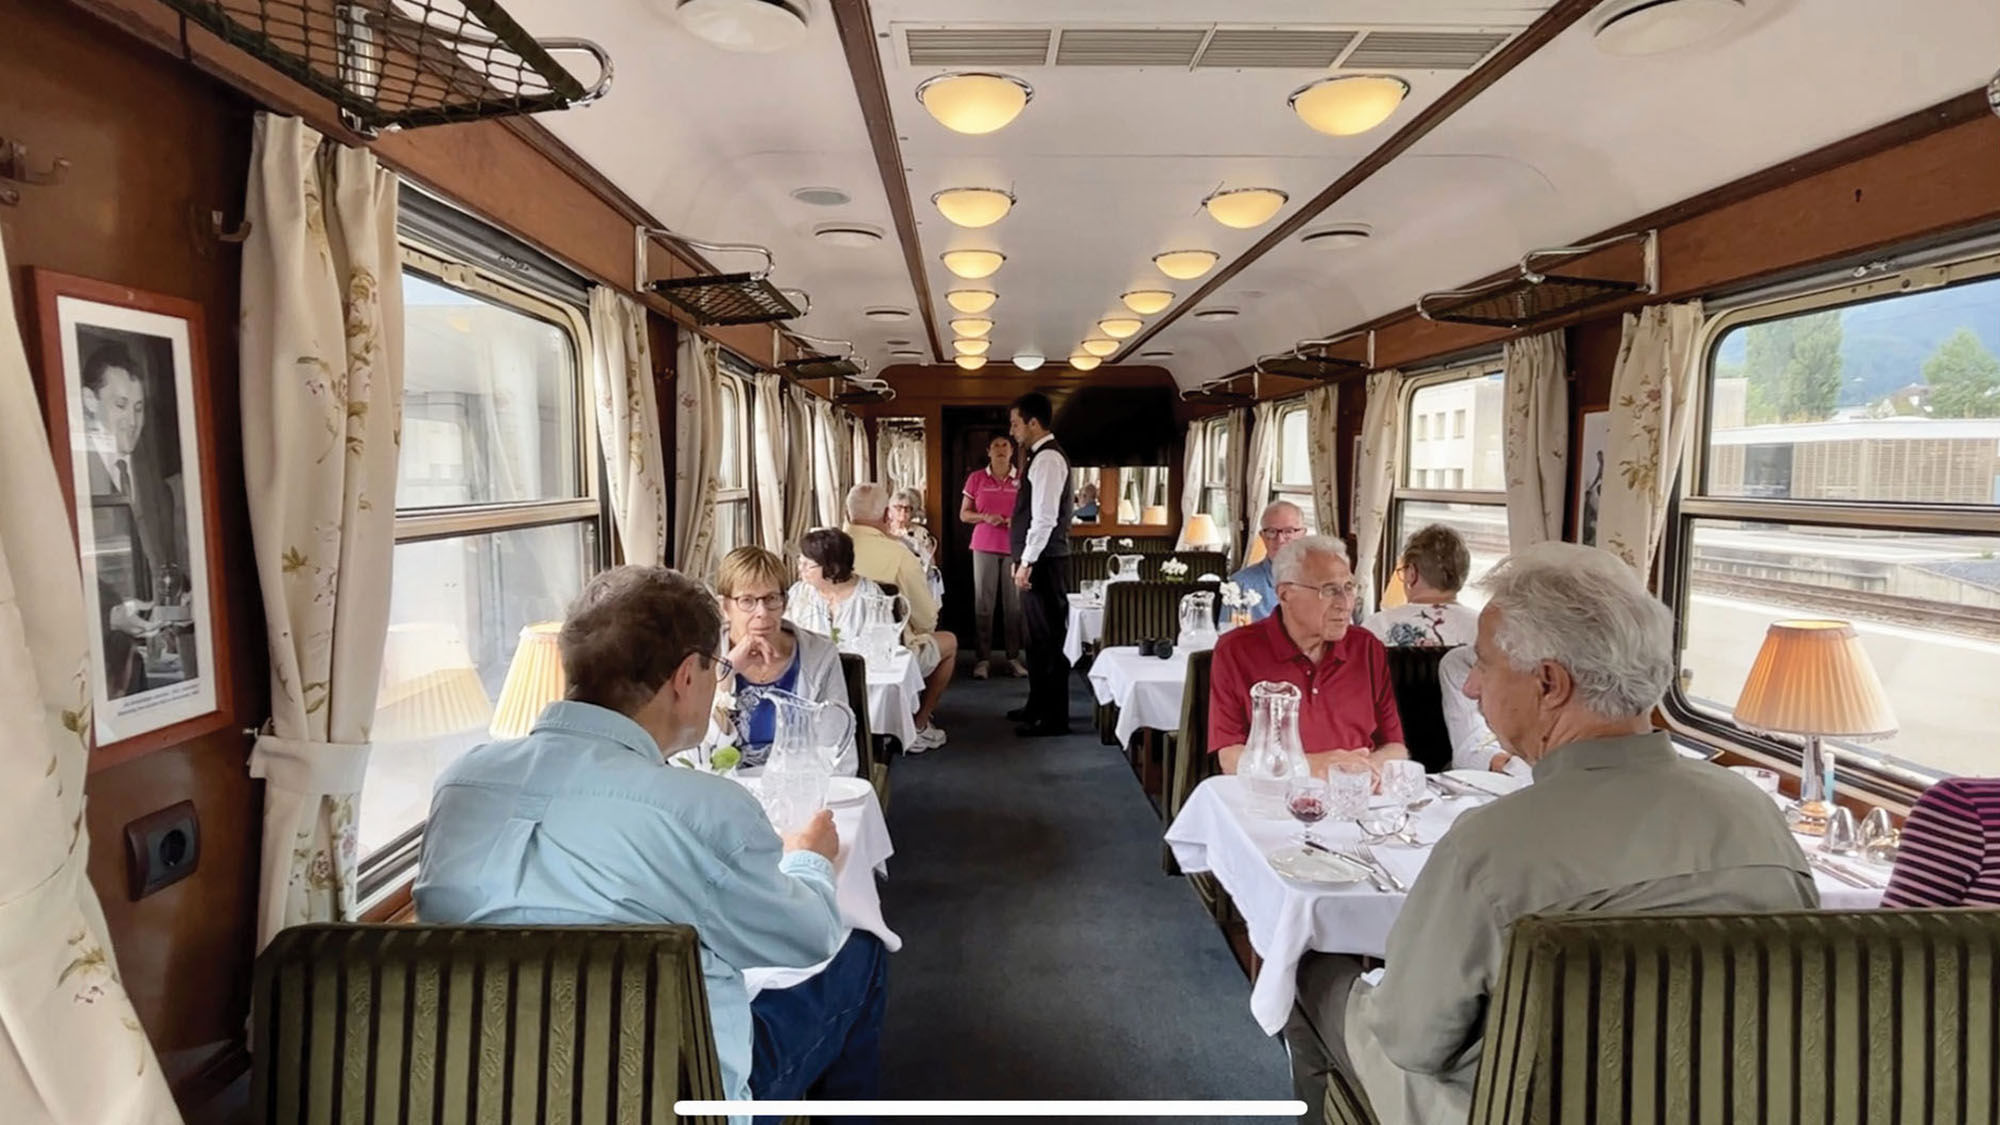 Passengers enjoy a meal in the dining car.